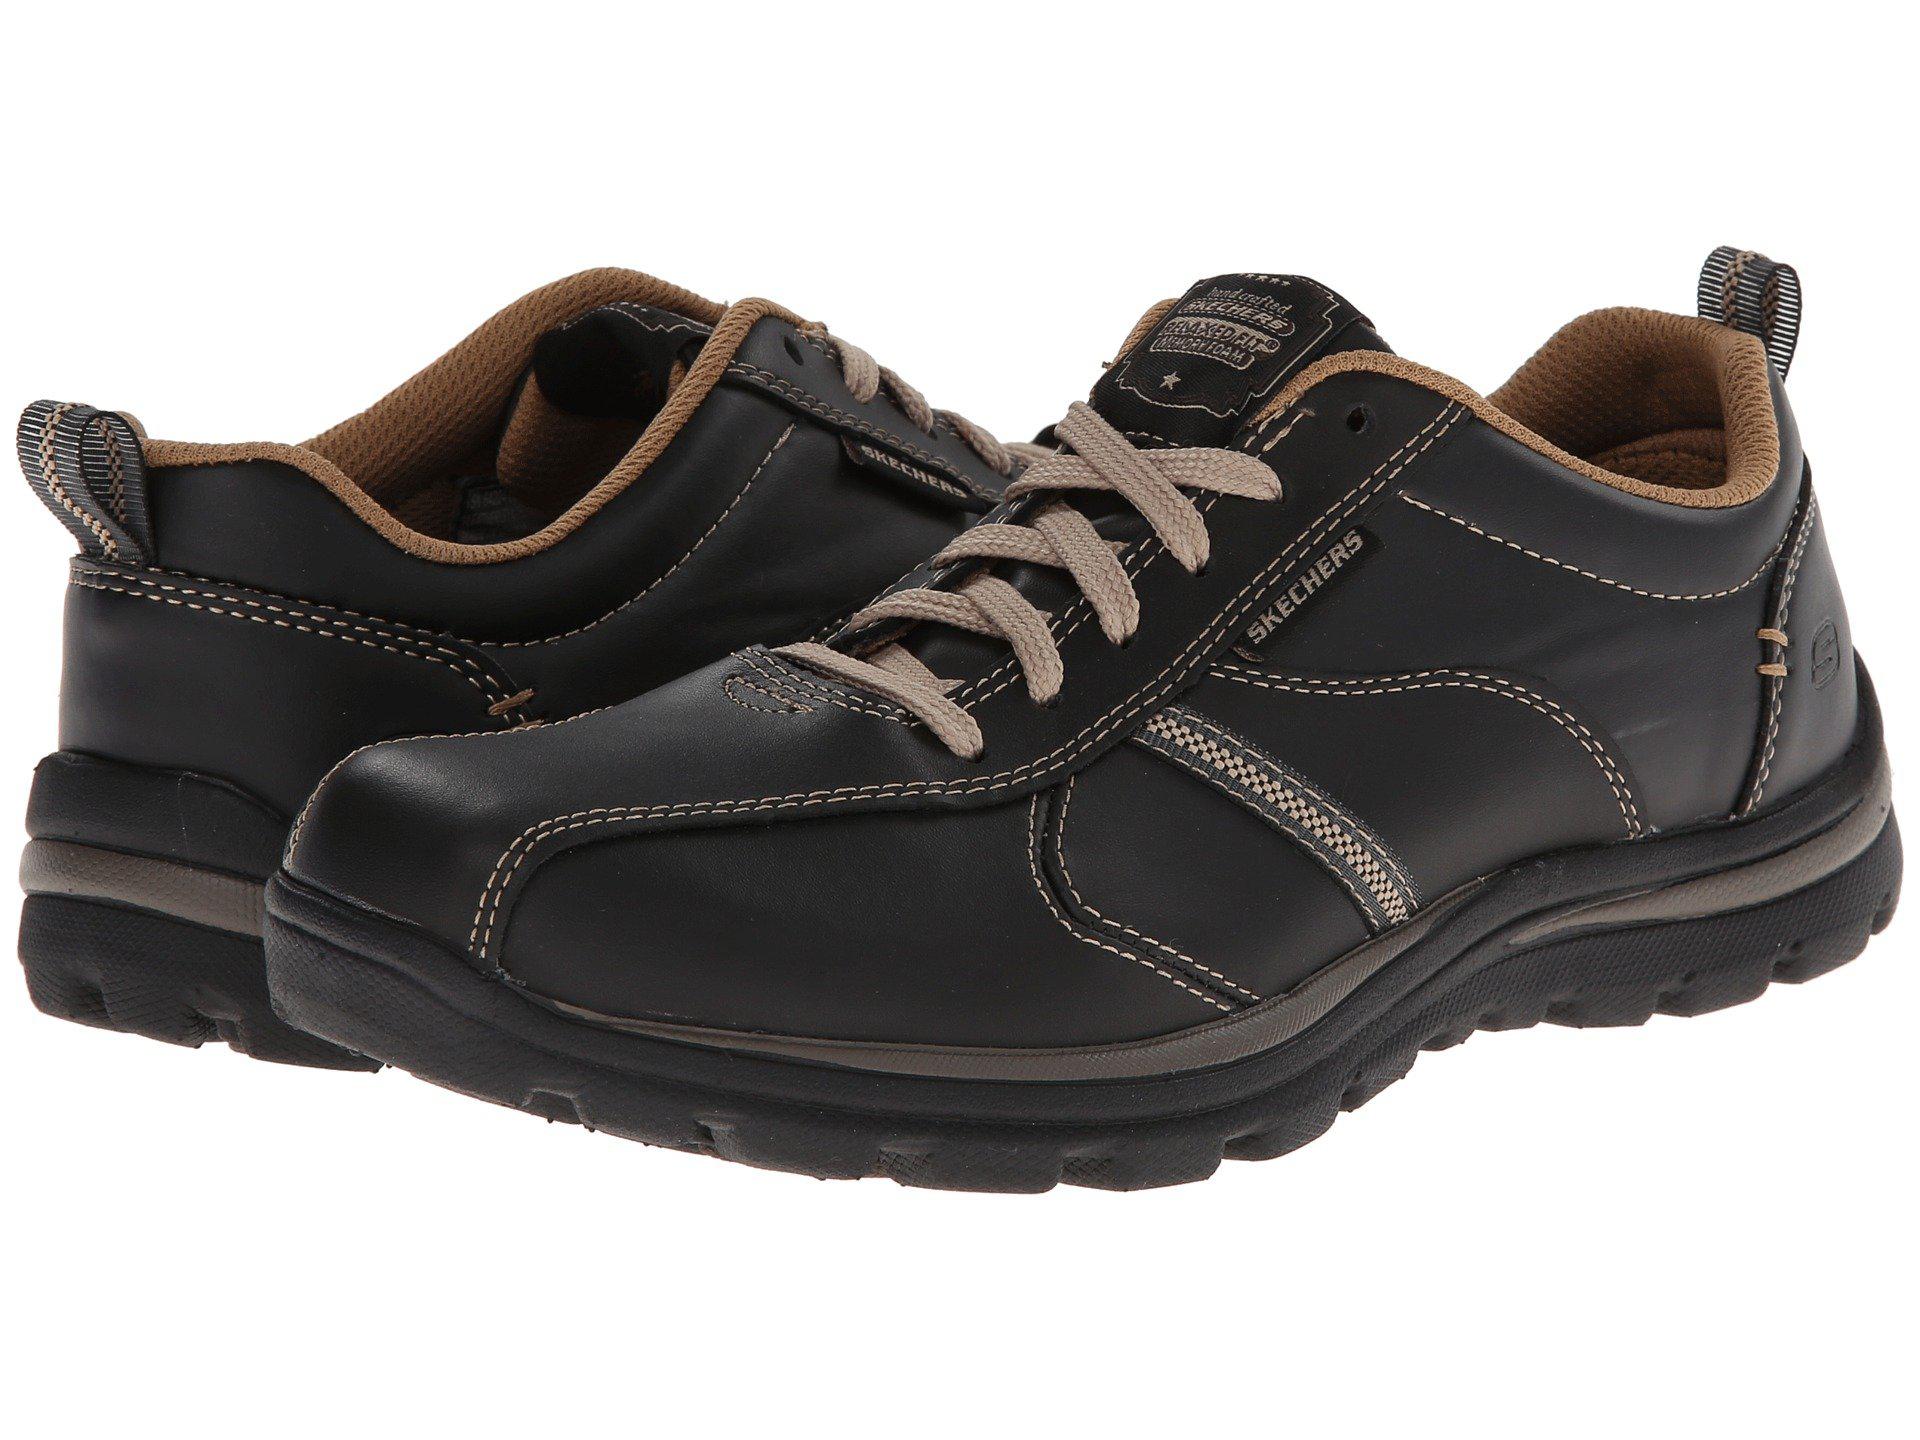 Skechers Leather Relaxed Fit Superior - Levoy (dark Brown) Men's Shoes in  Black/Tan (Black) for Men - Lyst